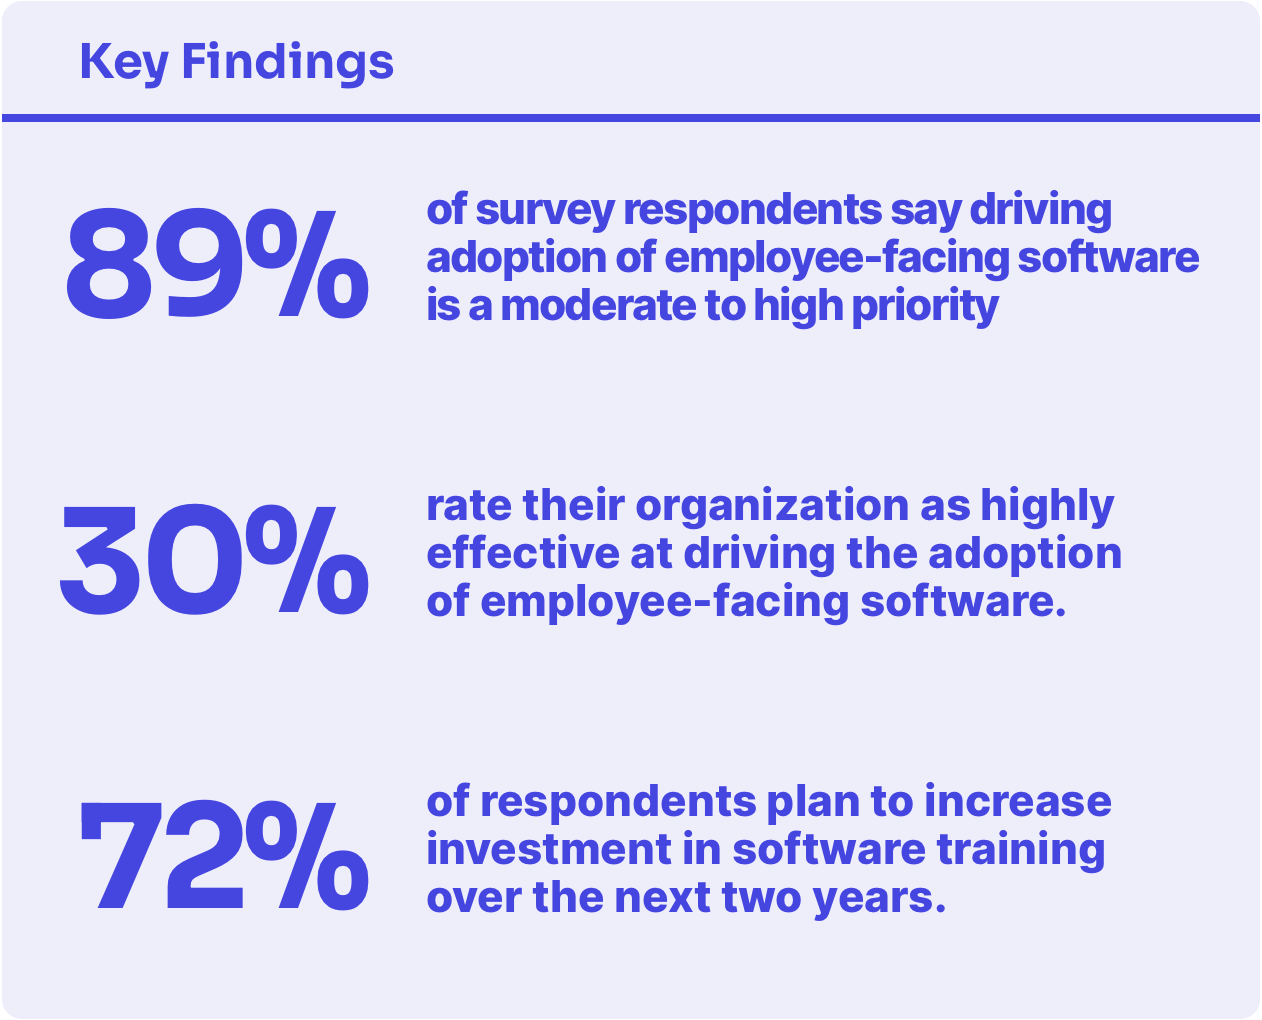 89% of survey respondents say driving digital adoption of employee-facing software is a top priority.
Only 30% rate their organization as highly effective at driving the adoption of employee-facing software
72% of respondents plan to increase investment in software training over the next two years.